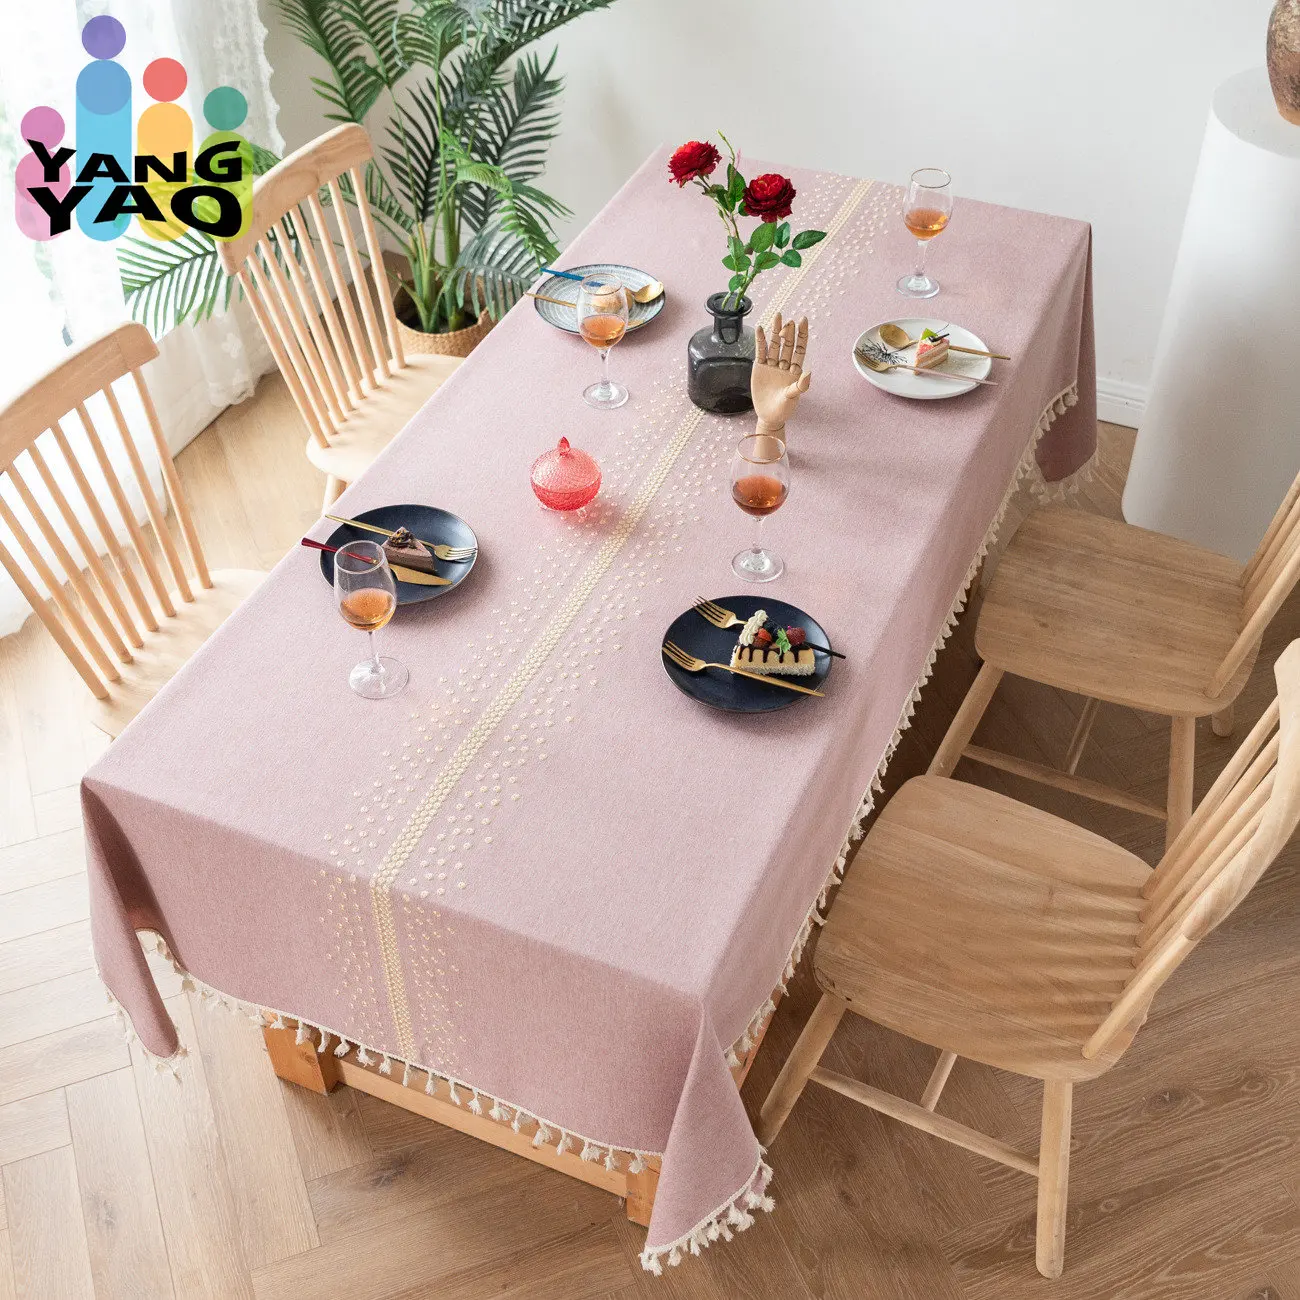 

Pink Birthday Tablecloth Cotton Linen Tablecloth Table Flag Decorative Table Mat Rectangular PVC Waterproof Fireplace Countertop